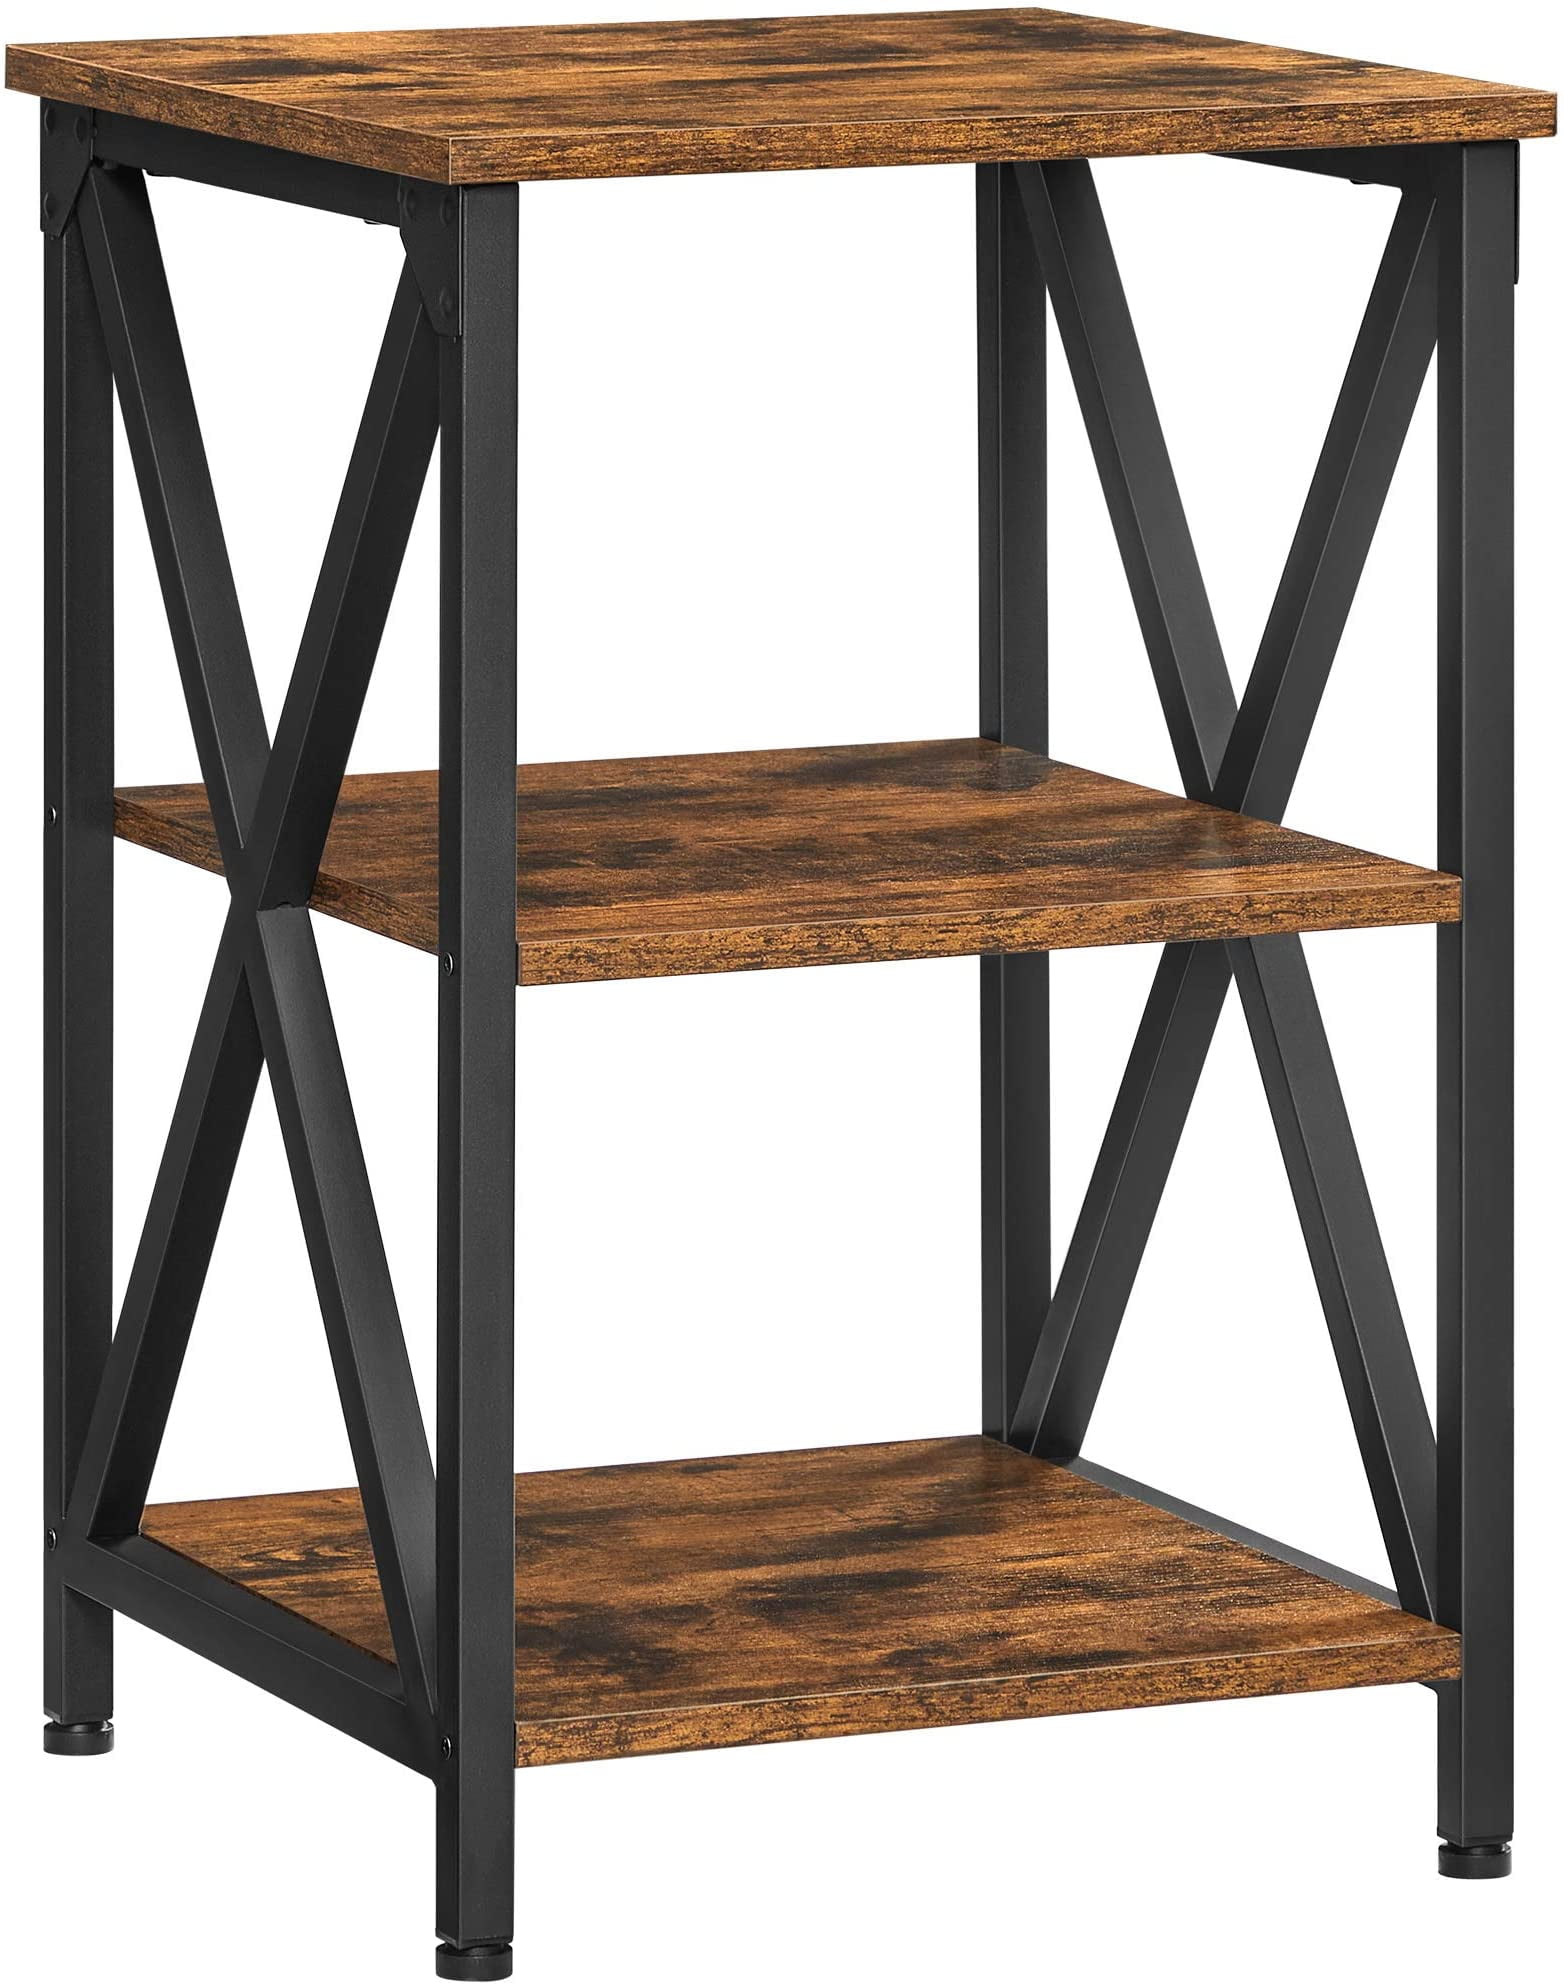 prinses heb vertrouwen Rudyard Kipling Nightstand, 3-Tier Side Table with Storage Shelf, End Table Steel Frame,  for Bedroom, Living Room, X-Shaped Design, Farmhouse Industrial Style,  Rustic Brown and Black ULET278B01 - Walmart.com